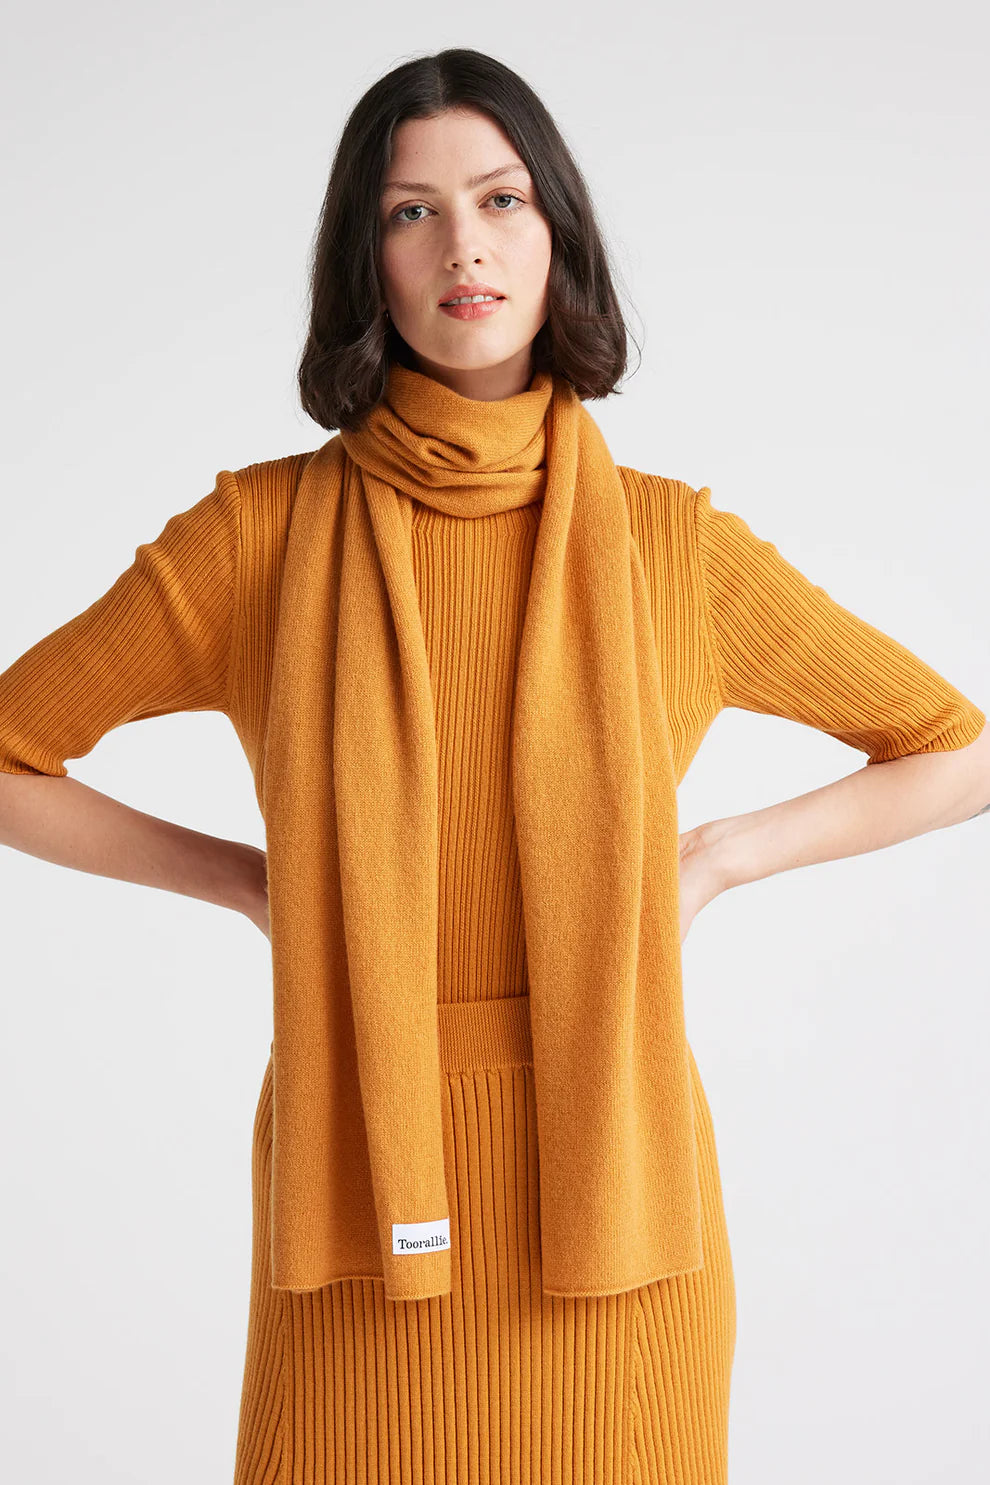 Stay cozy in style with our Mandarin Merino Lambswool Scarf. The perfect accessory for chilly days.